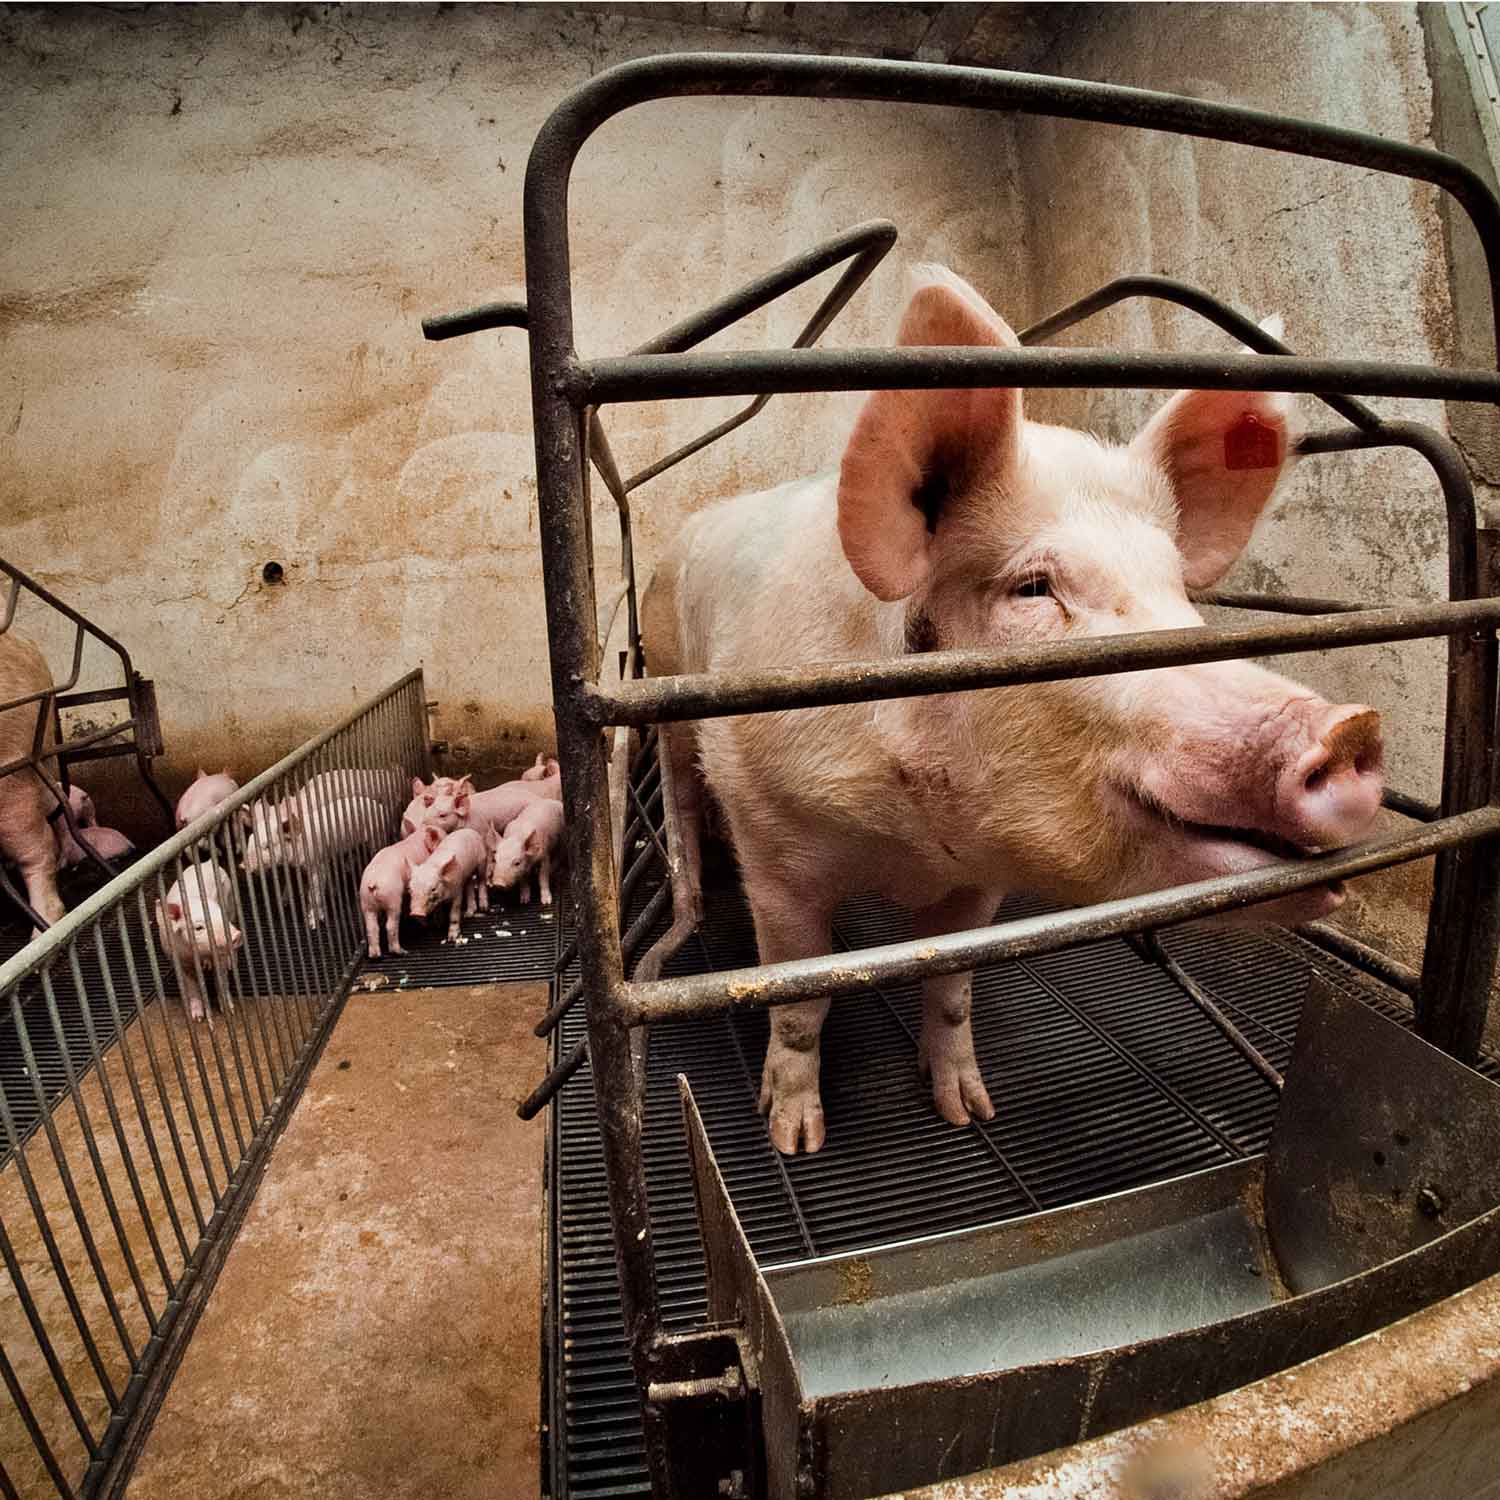 Farrowing crate with piglets